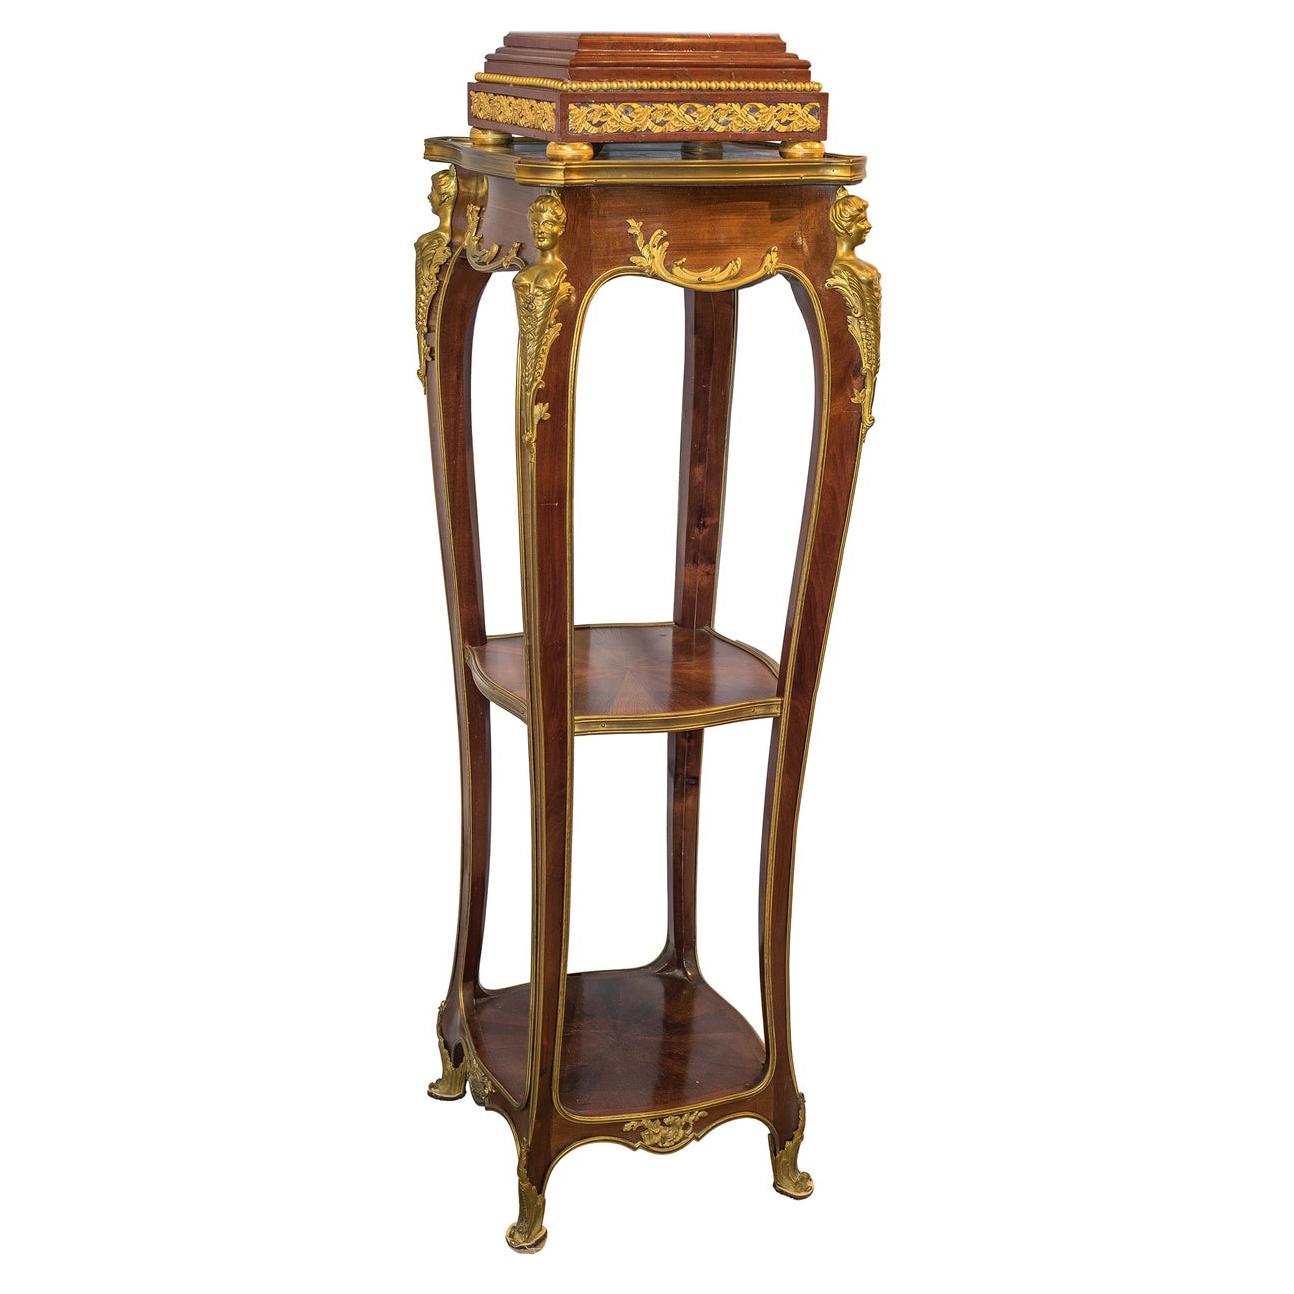 French Mahogany Marble-Top Pedestal with Ormolu Mounts